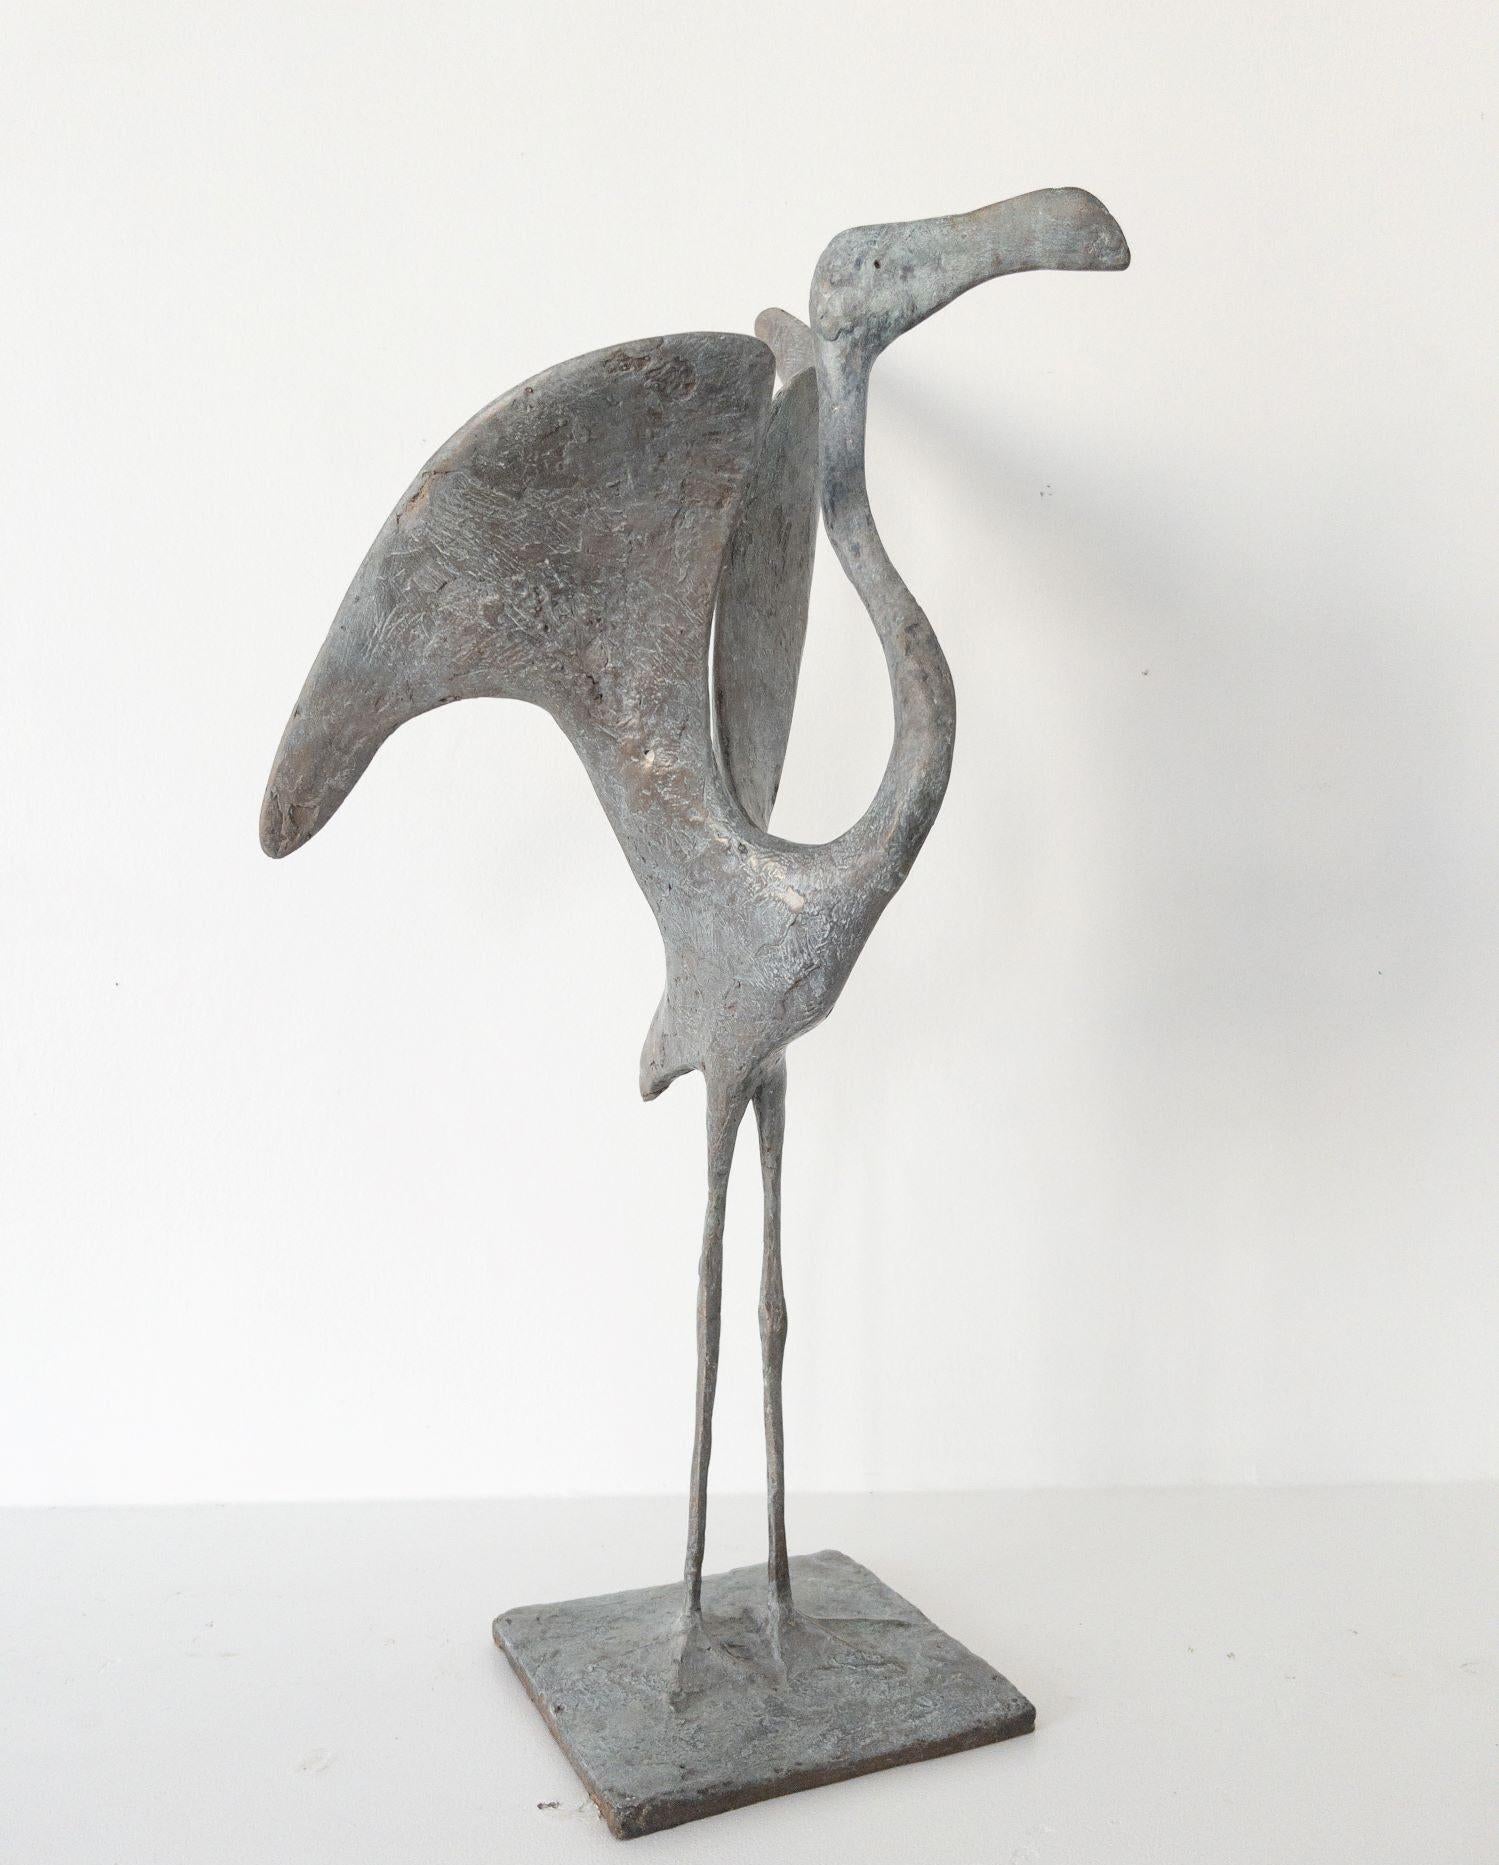 Flamingo I is a bronze sculpture by French contemporary artist Pierre Yermia, dimensions are 61 × 33 × 31 cm (24 × 13 × 12.2 in). 
The sculpture is signed and numbered, it is part of a limited edition of 8 editions + 4 artist’s proofs, and comes